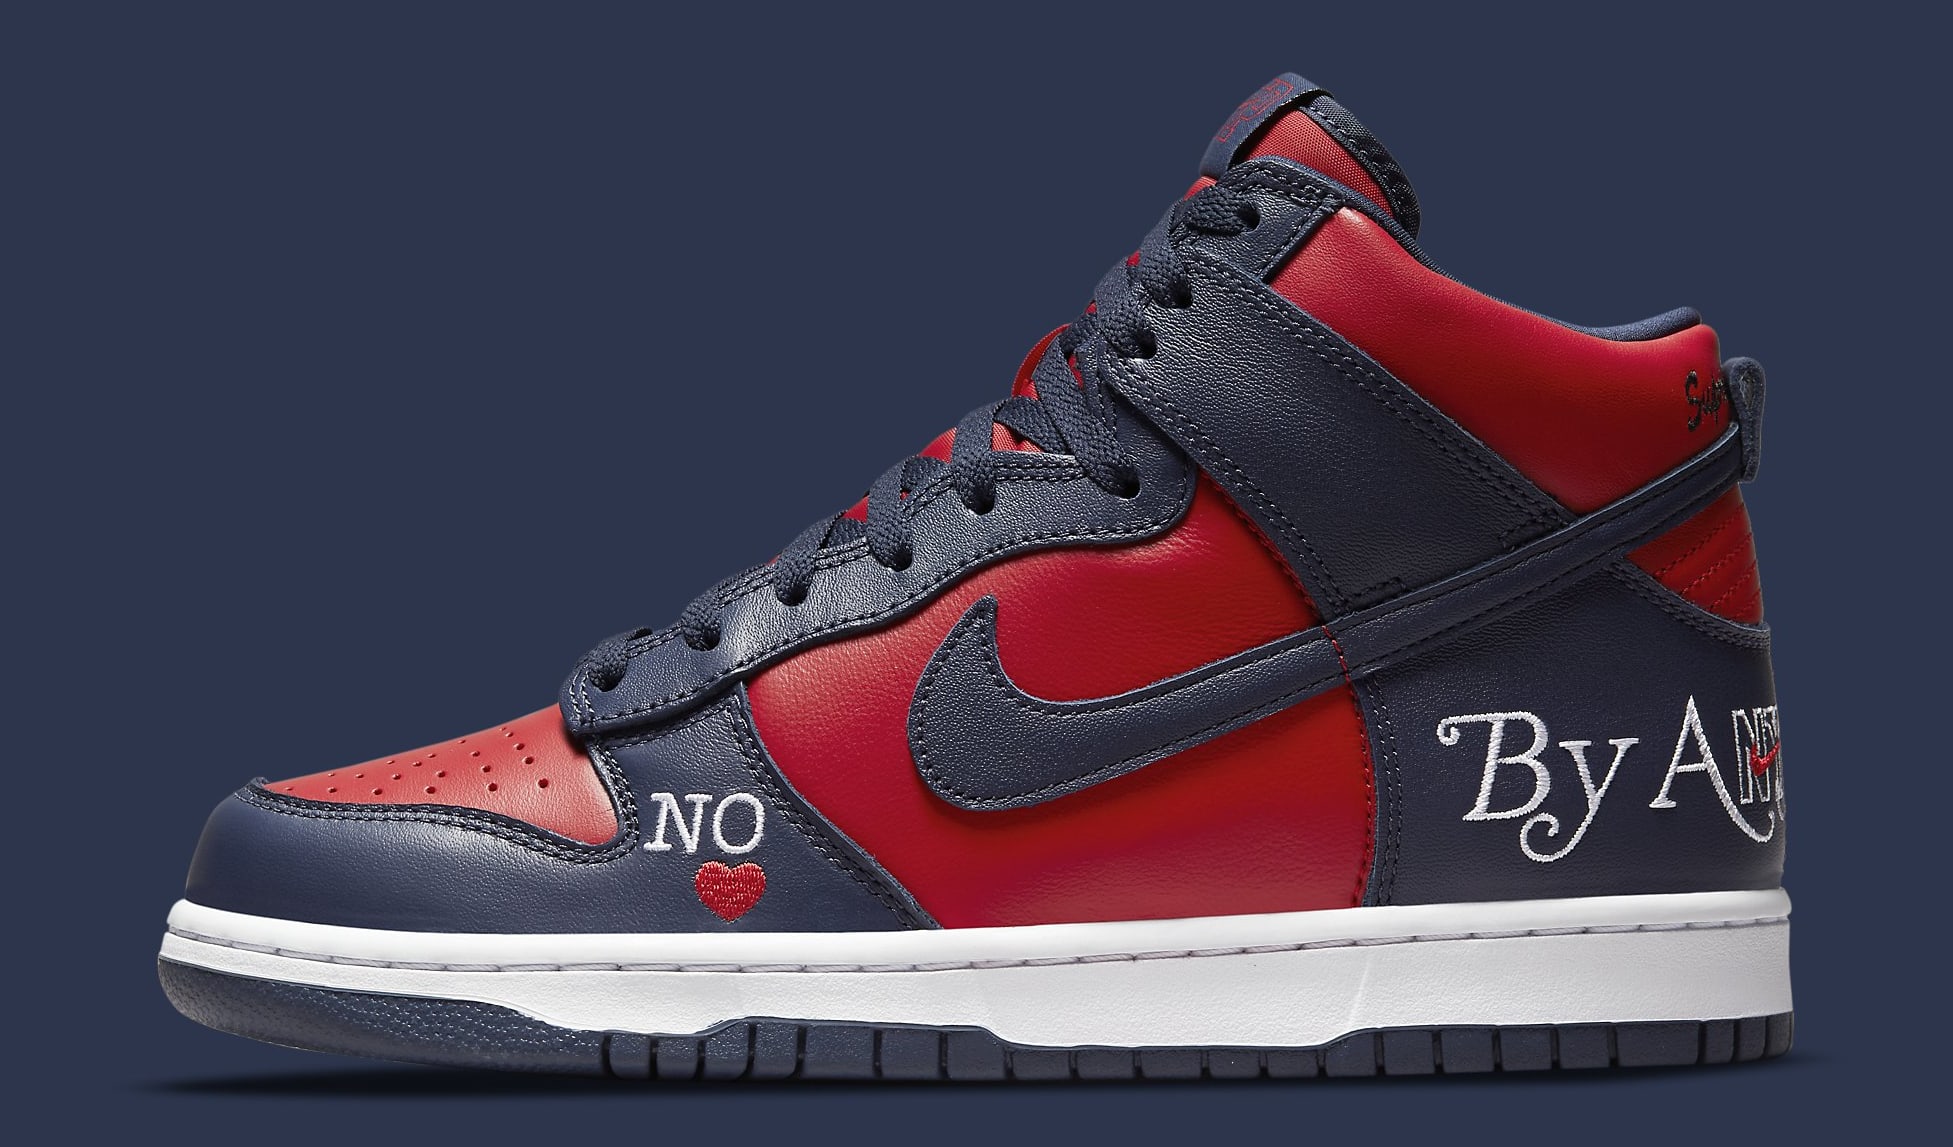 Supreme x Nike Dunk High Navy/Red DN3741 600 (Lateral)